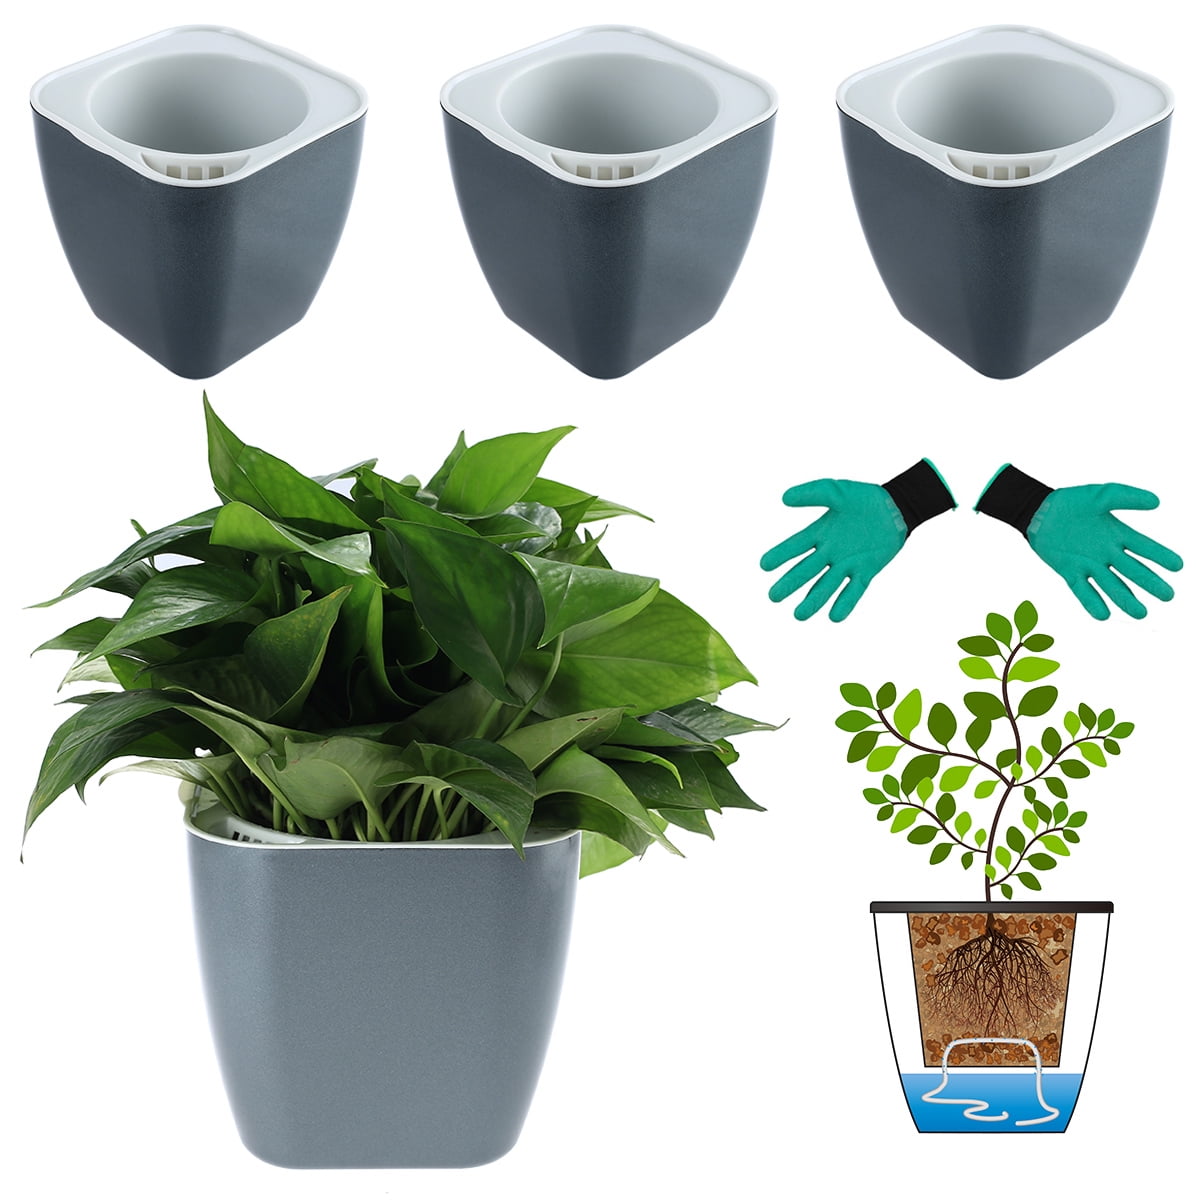 Modern Decorative Flower Pot/Window Box for All House Plants Set of 6 Succulents MOHENA 6 Inch Self Watering Planters Plastic Plant Pot African Violets Brown Herbs Flowers